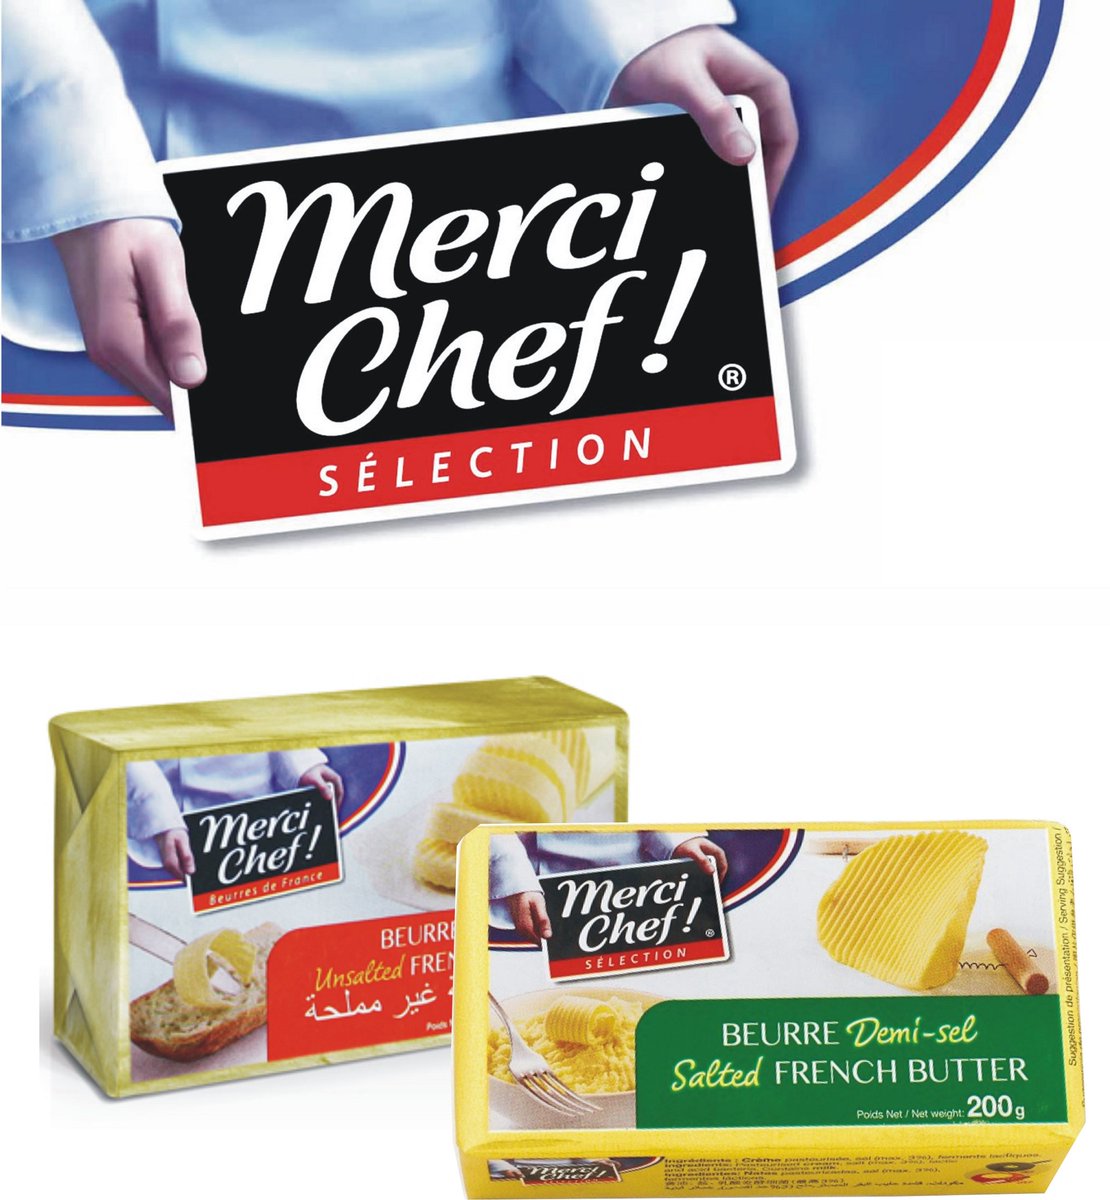 Merci Chef Butter is made from selected French creams. 
Guarantee to obtain a natural, authentic and quality product. 
Uses on your bread and other recipes (sauces, desserts, cakes, pastries)
#Delifrost #fmcg #coldchain #availability #Mercichef #butter #natural #authentic